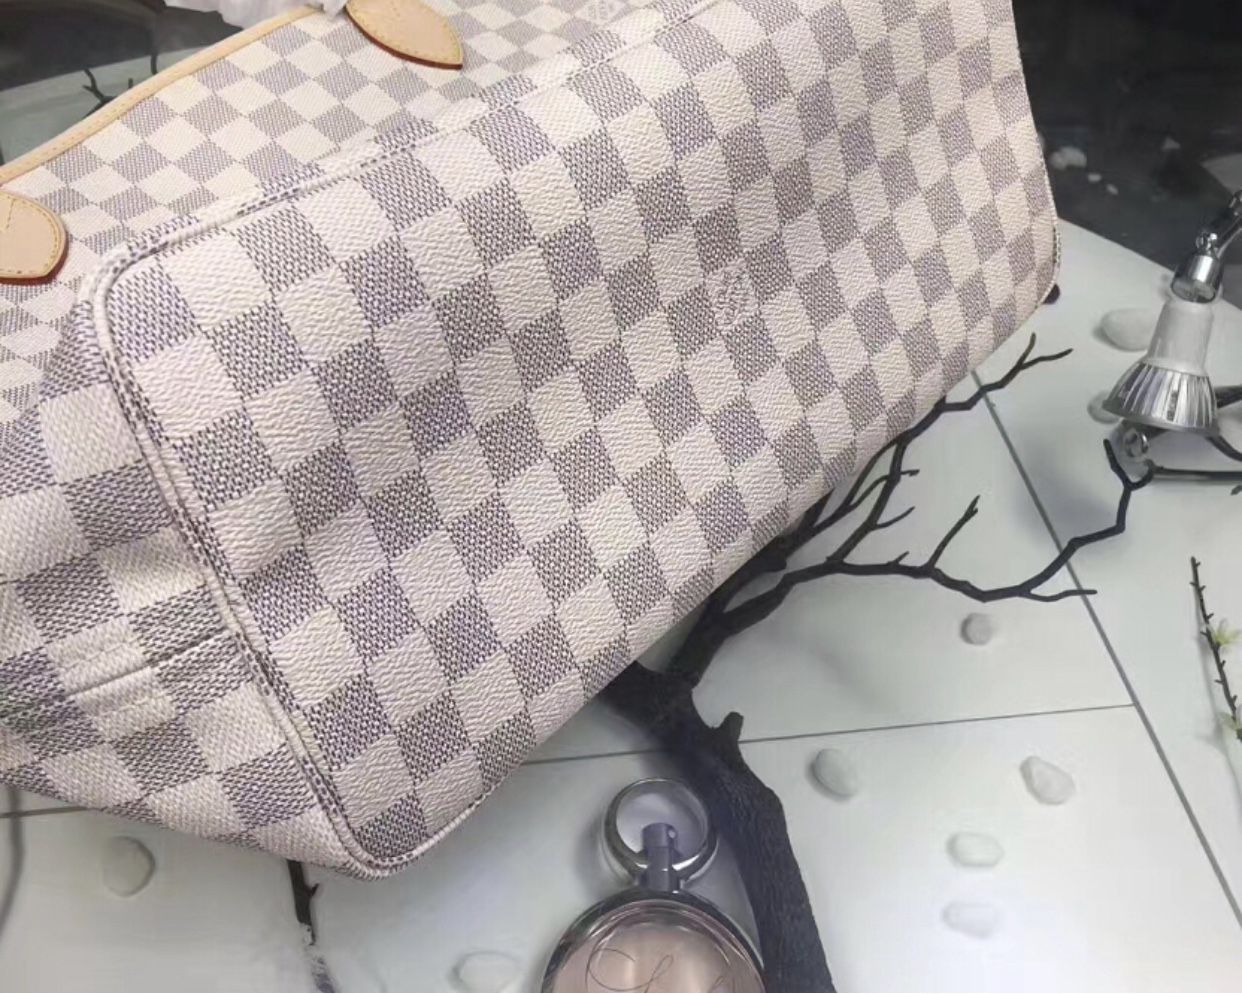 LV Monogram Never Full Tote . Medium size, authentic tags and dust bag. for  Sale in Hollywood, FL - OfferUp